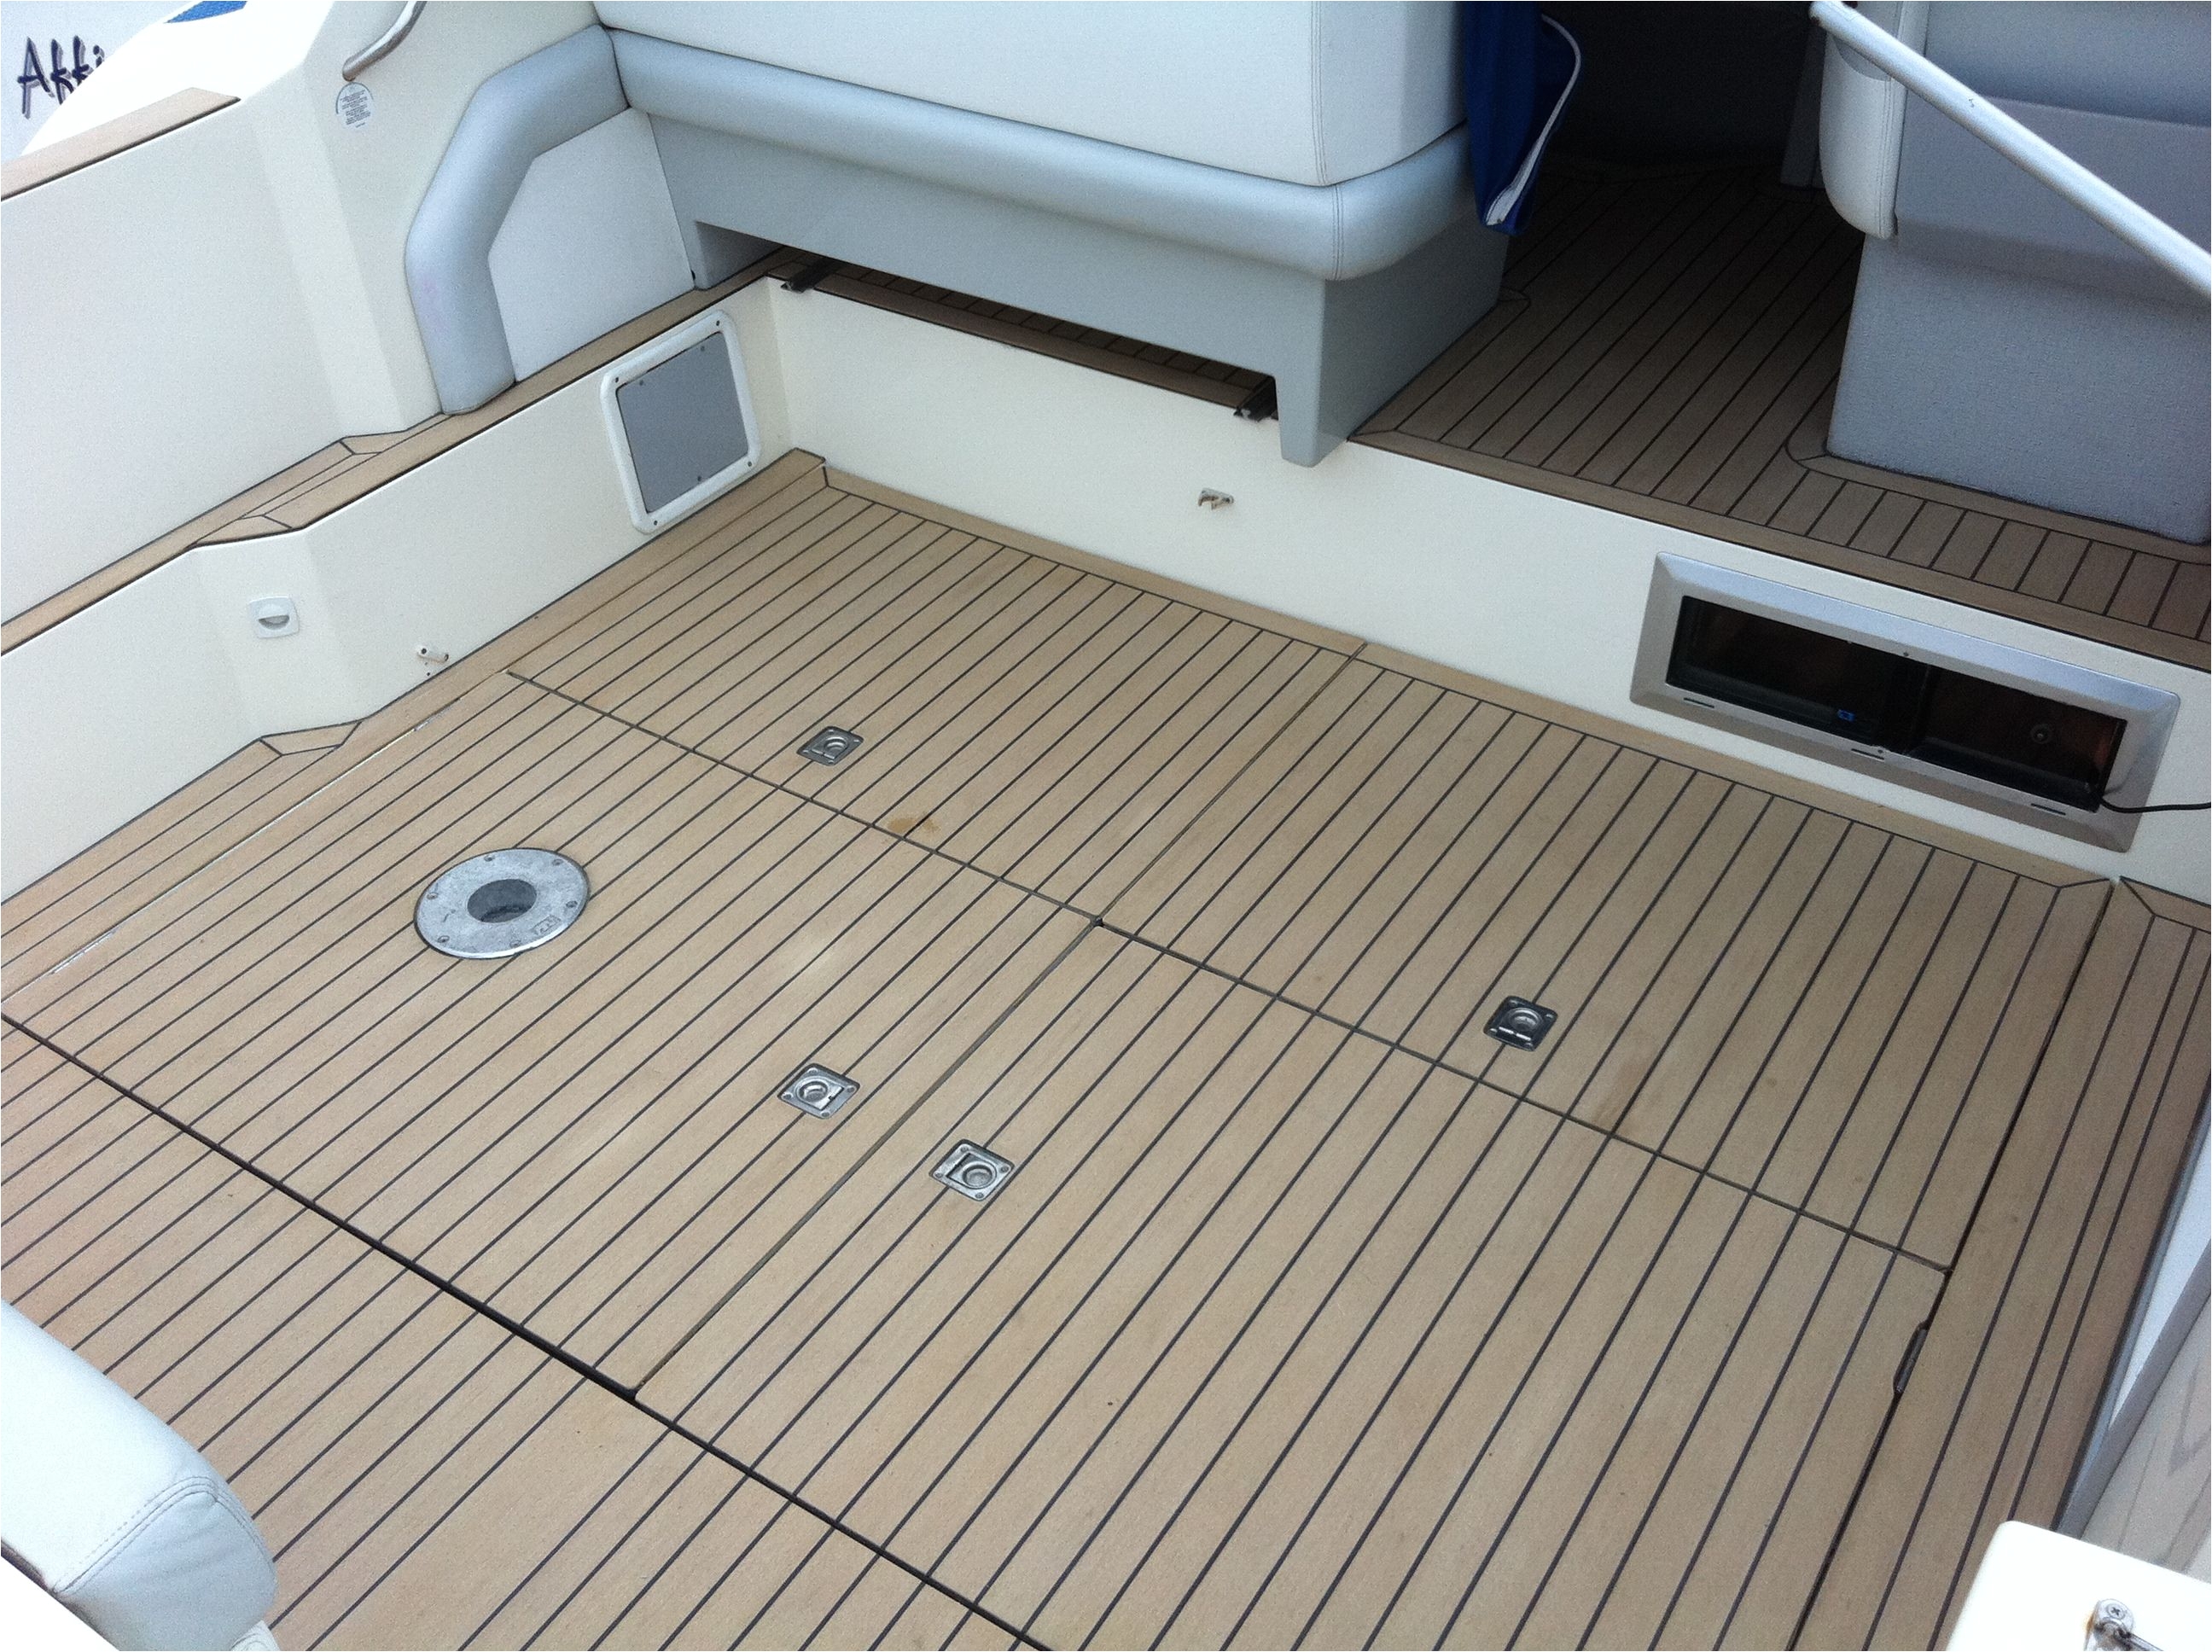 pvc pipe as boat dock floats rubber flooring for boats yacht deck